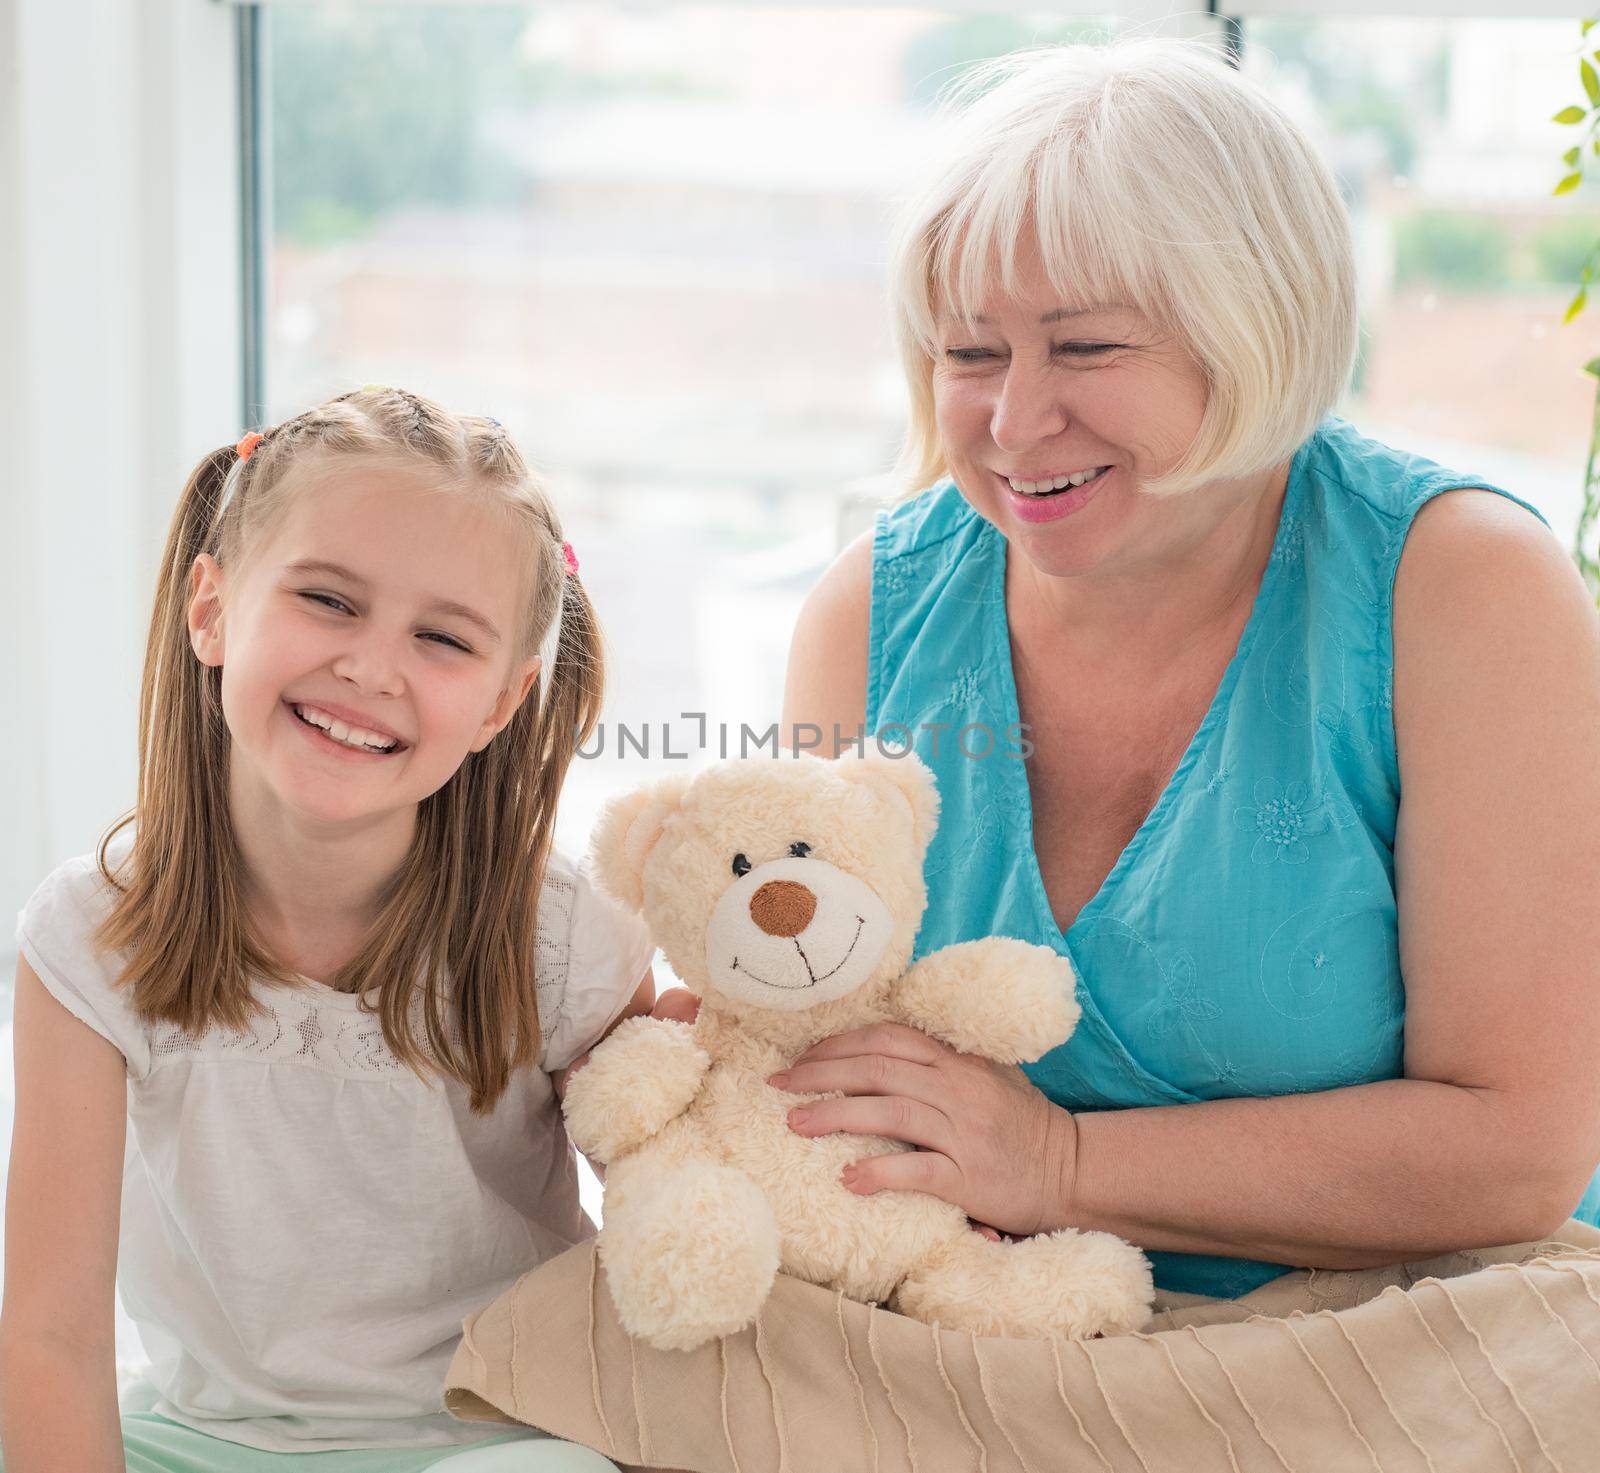 Grandmother and granddaughter playing with plush teddy by GekaSkr